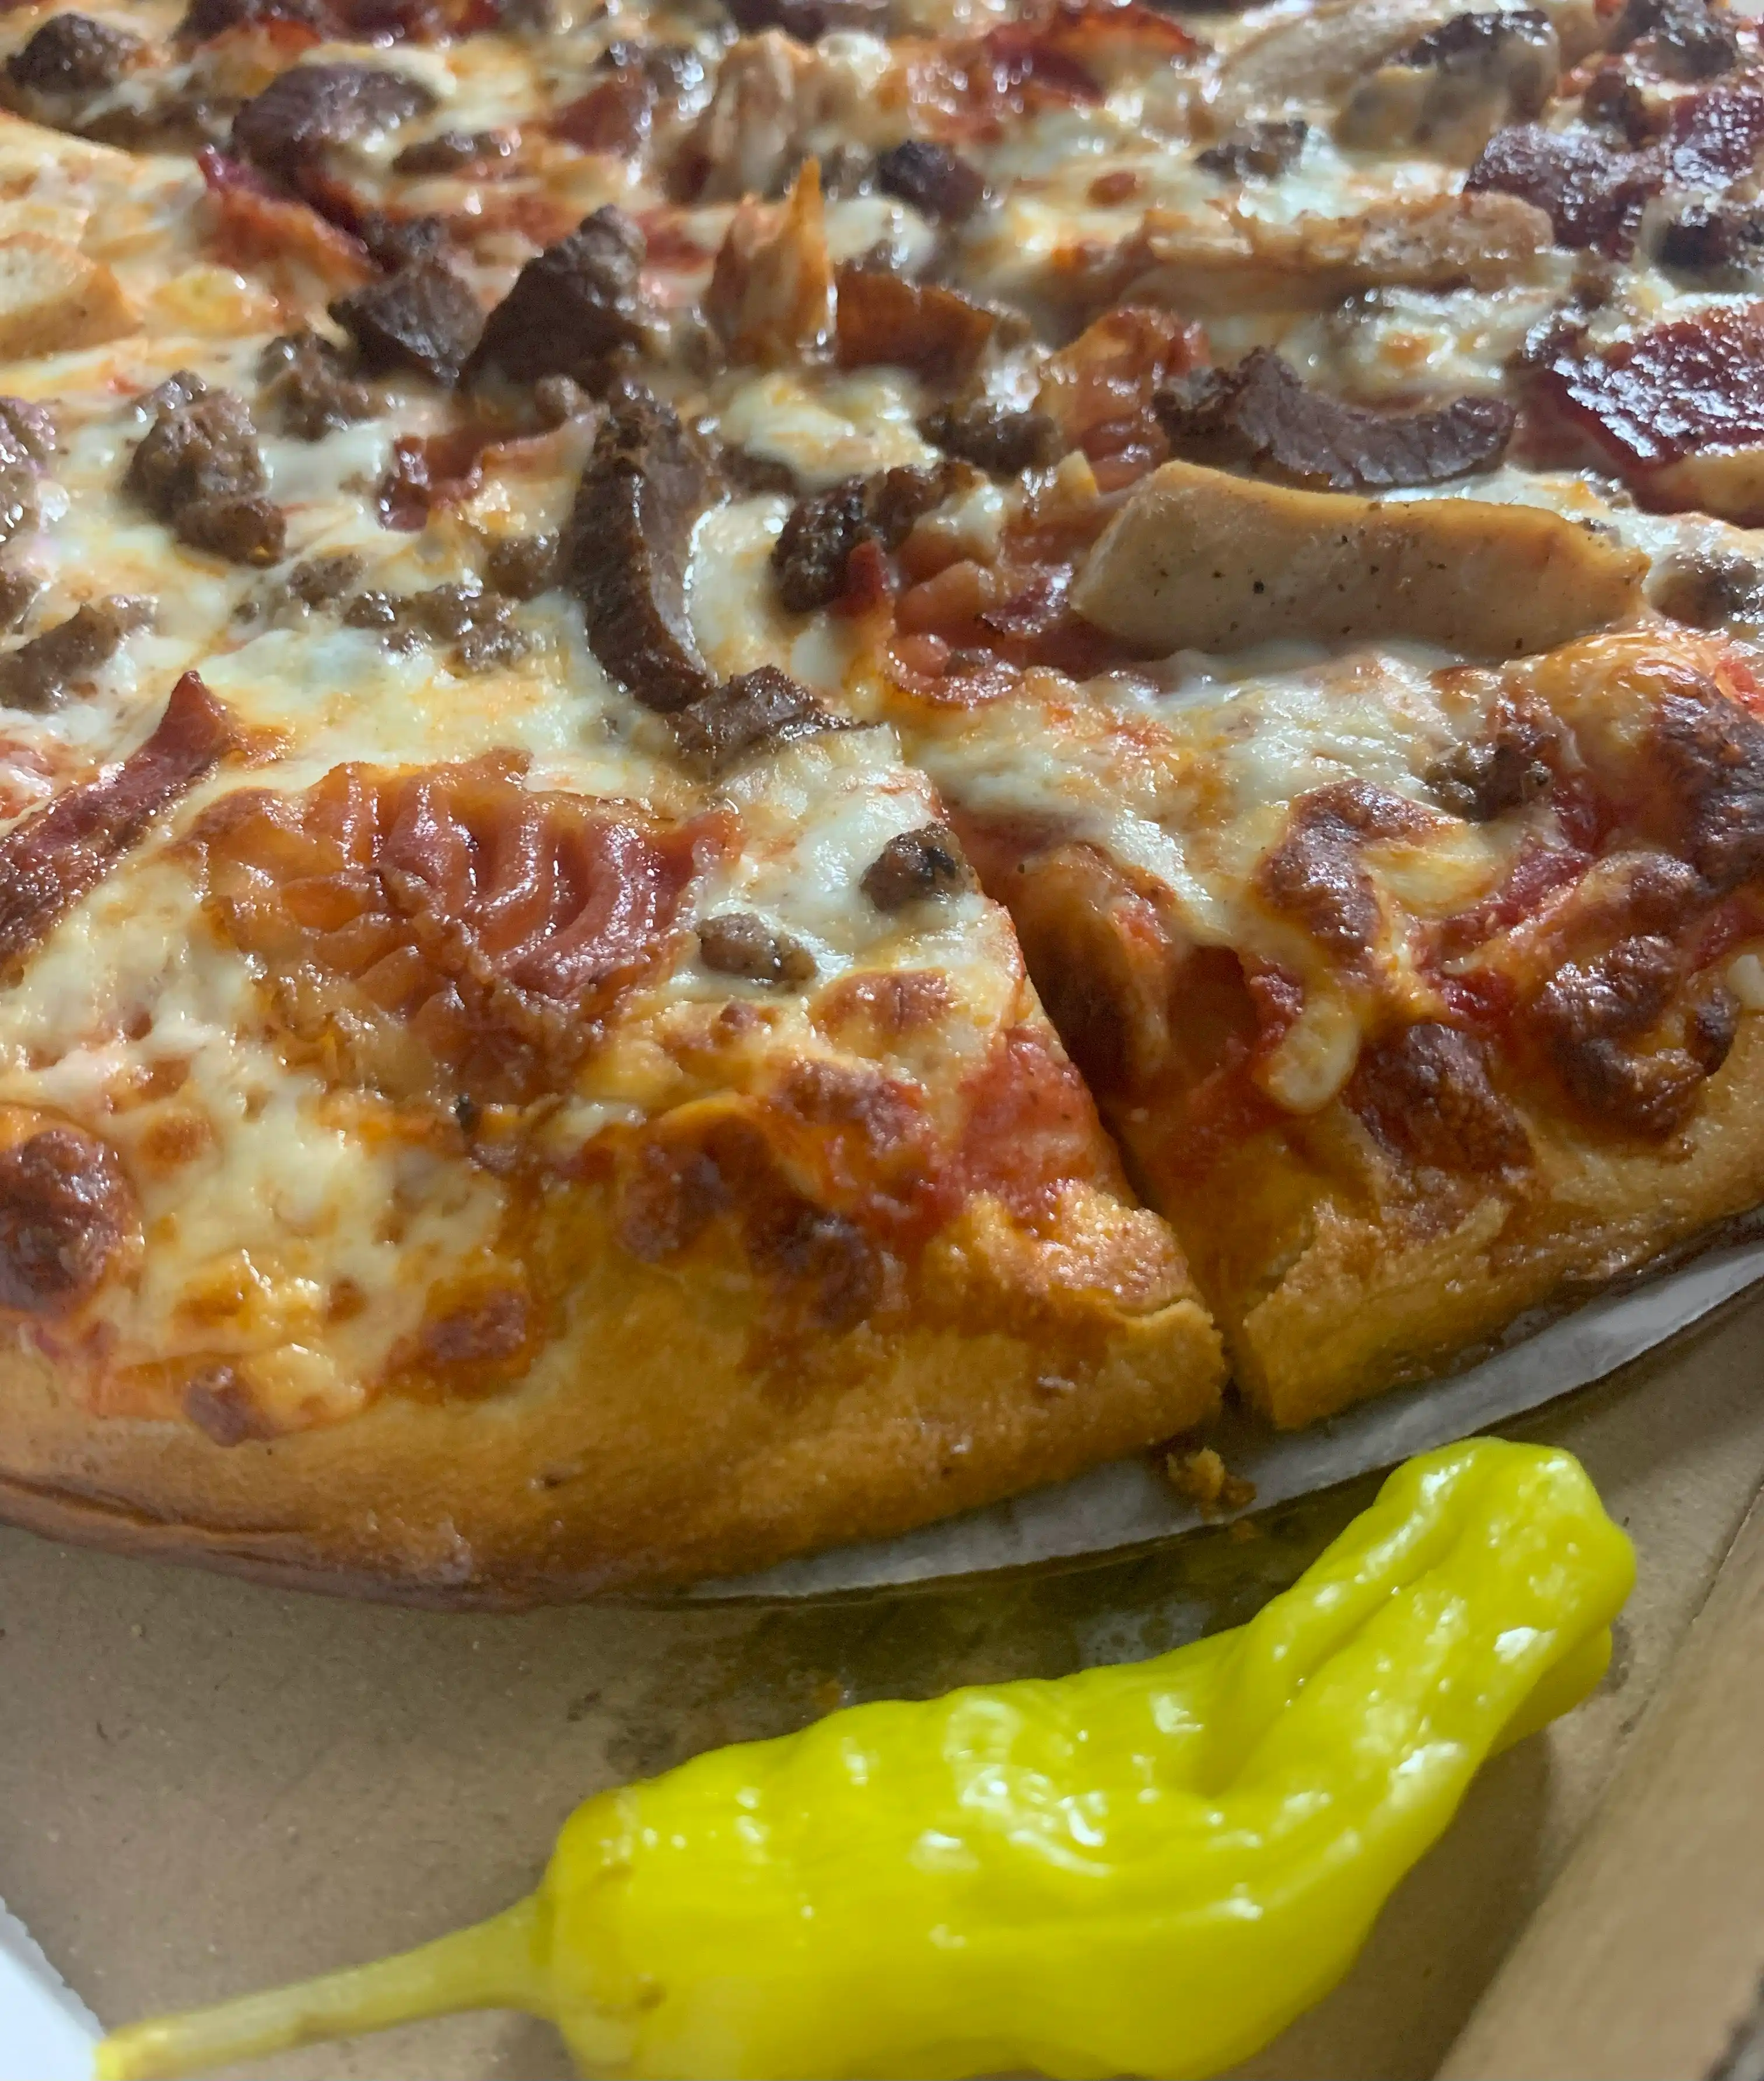 Try one of our amazing carry out specialty pizzas!!